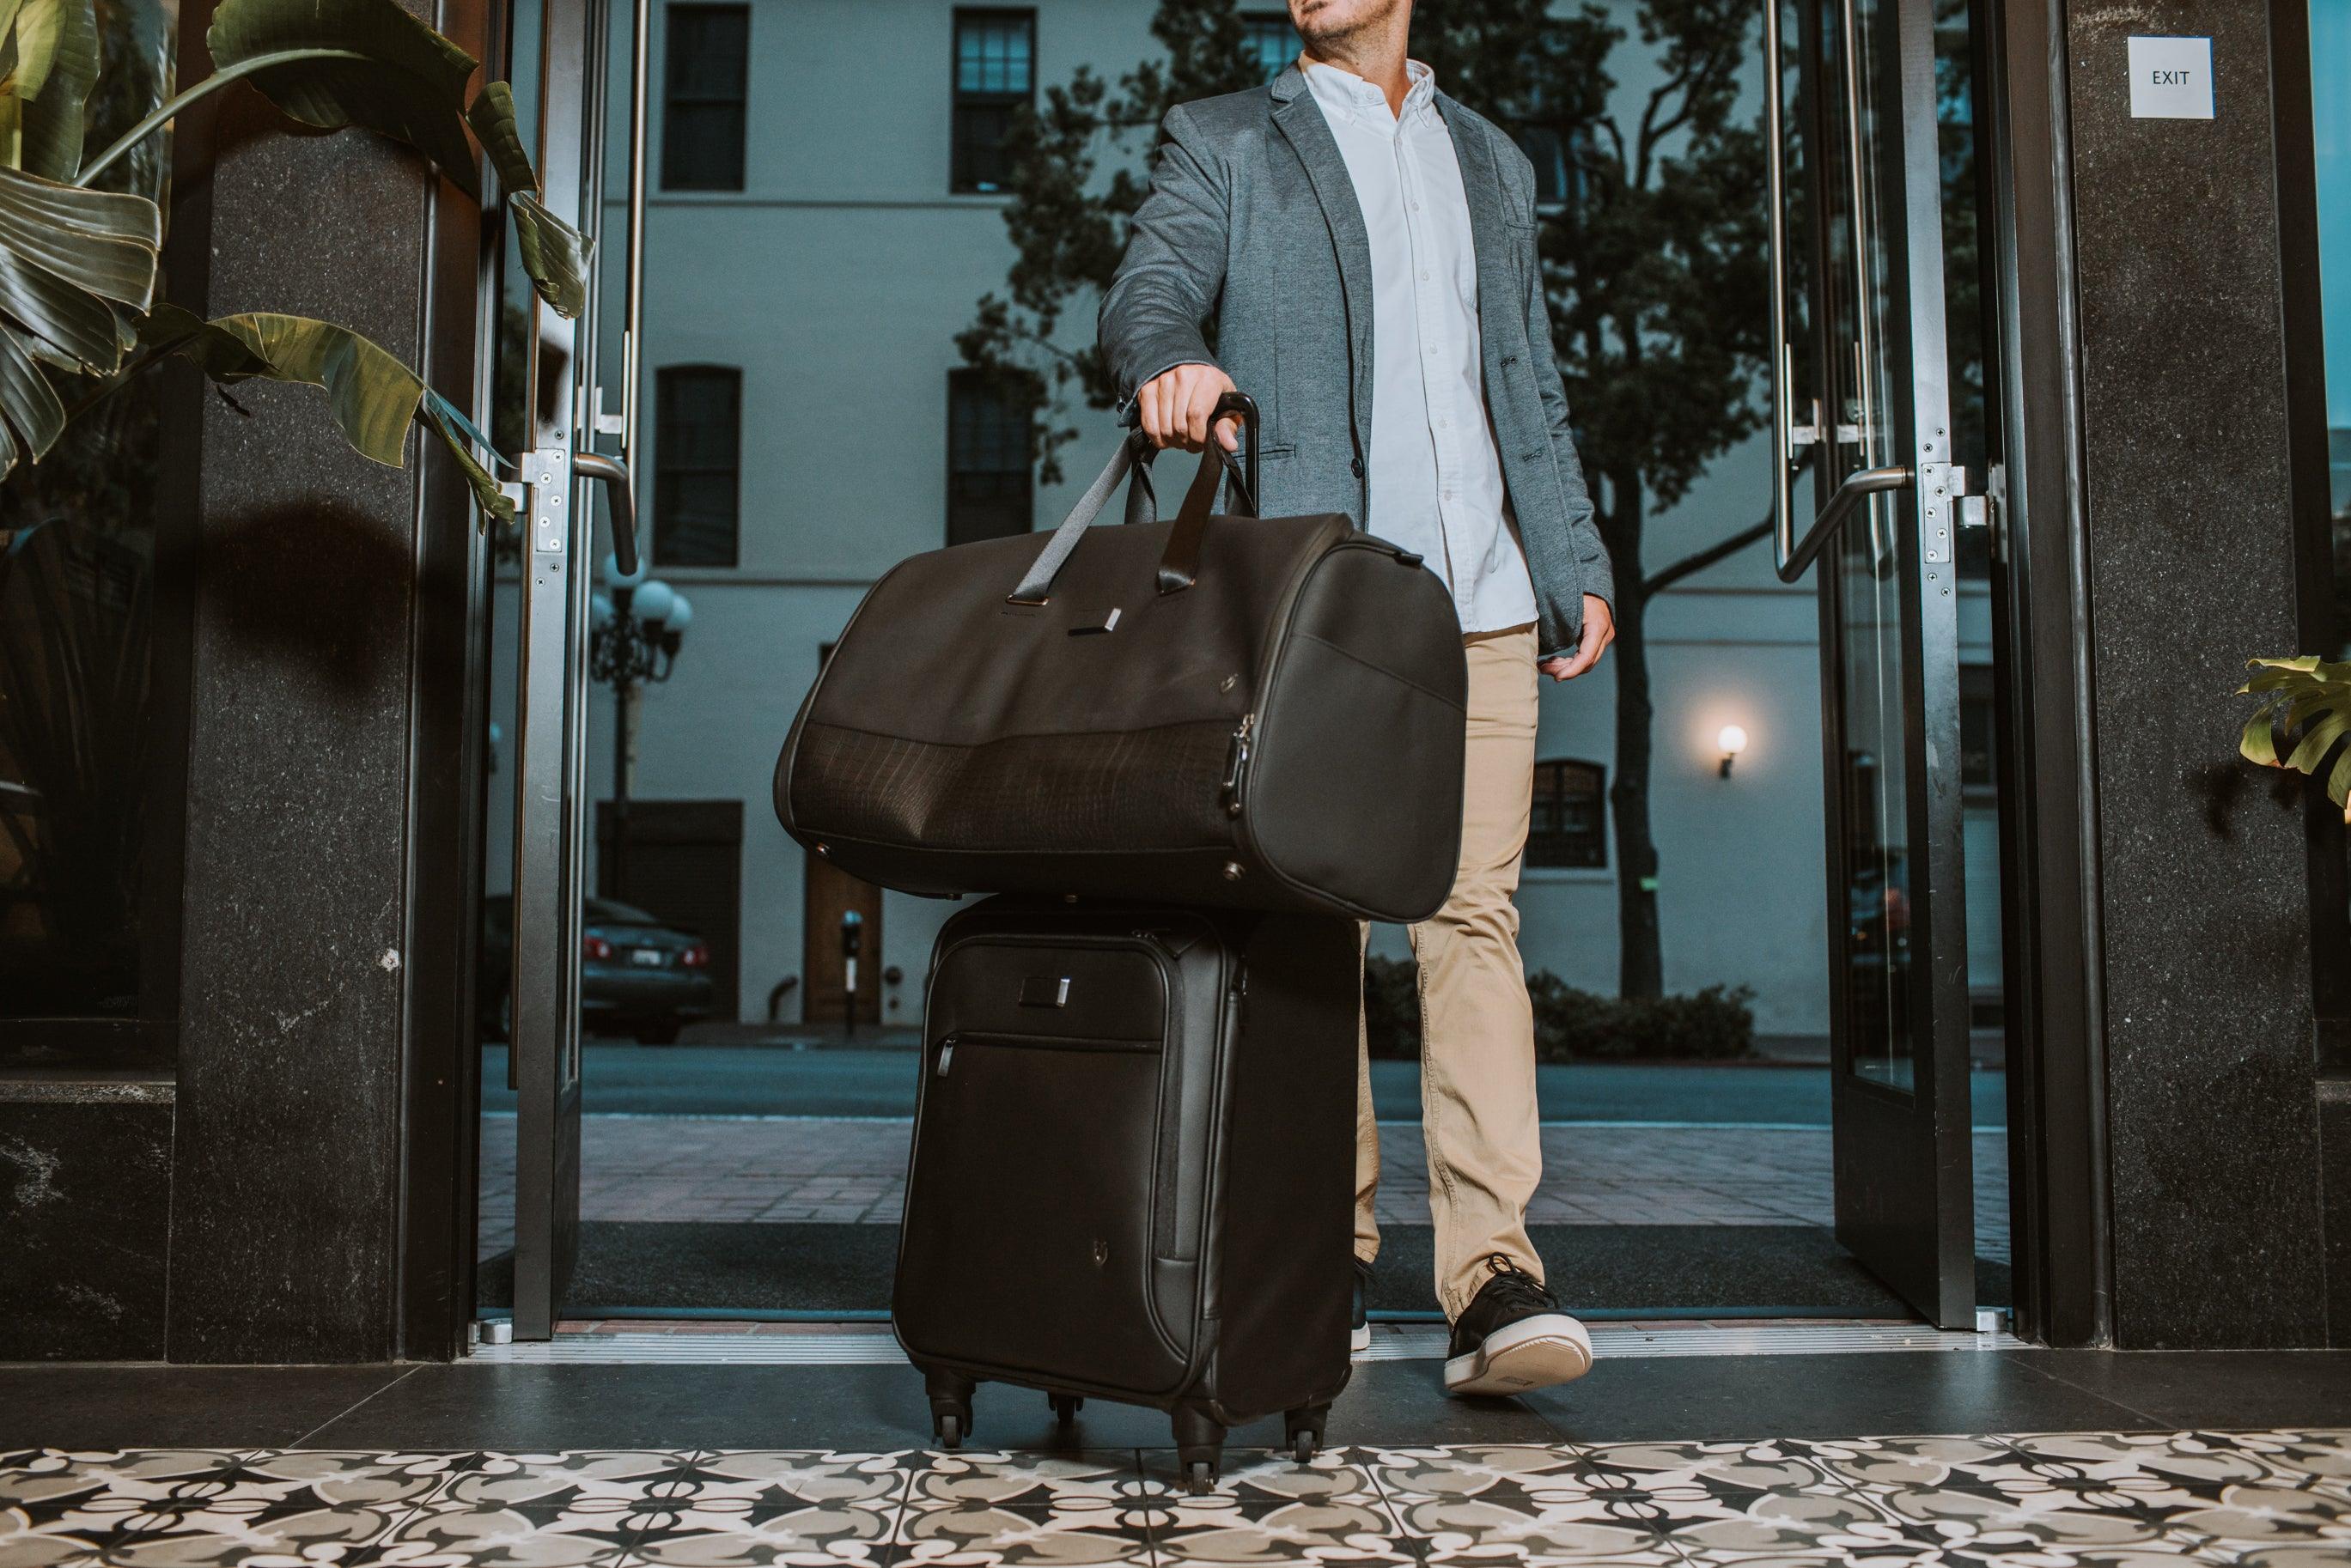 2020 Guide to Picking the Best Garment Duffel